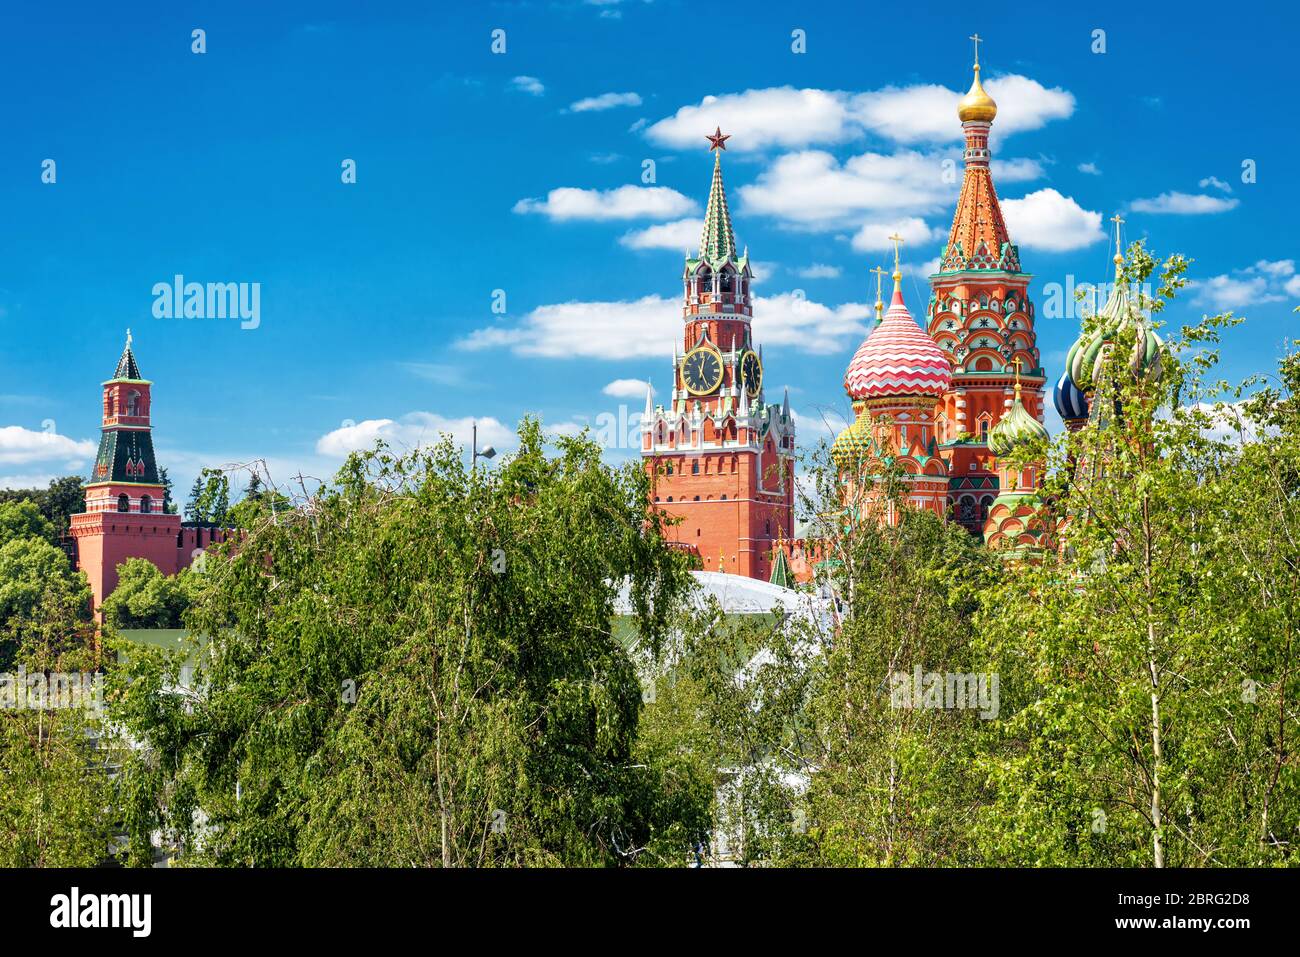 St Basil's Cathedral and Moscow Kremlin, Russia. This place is the main tourist attraction of Moscow. Beautiful scenic view of Moscow Kremlin in summe Stock Photo